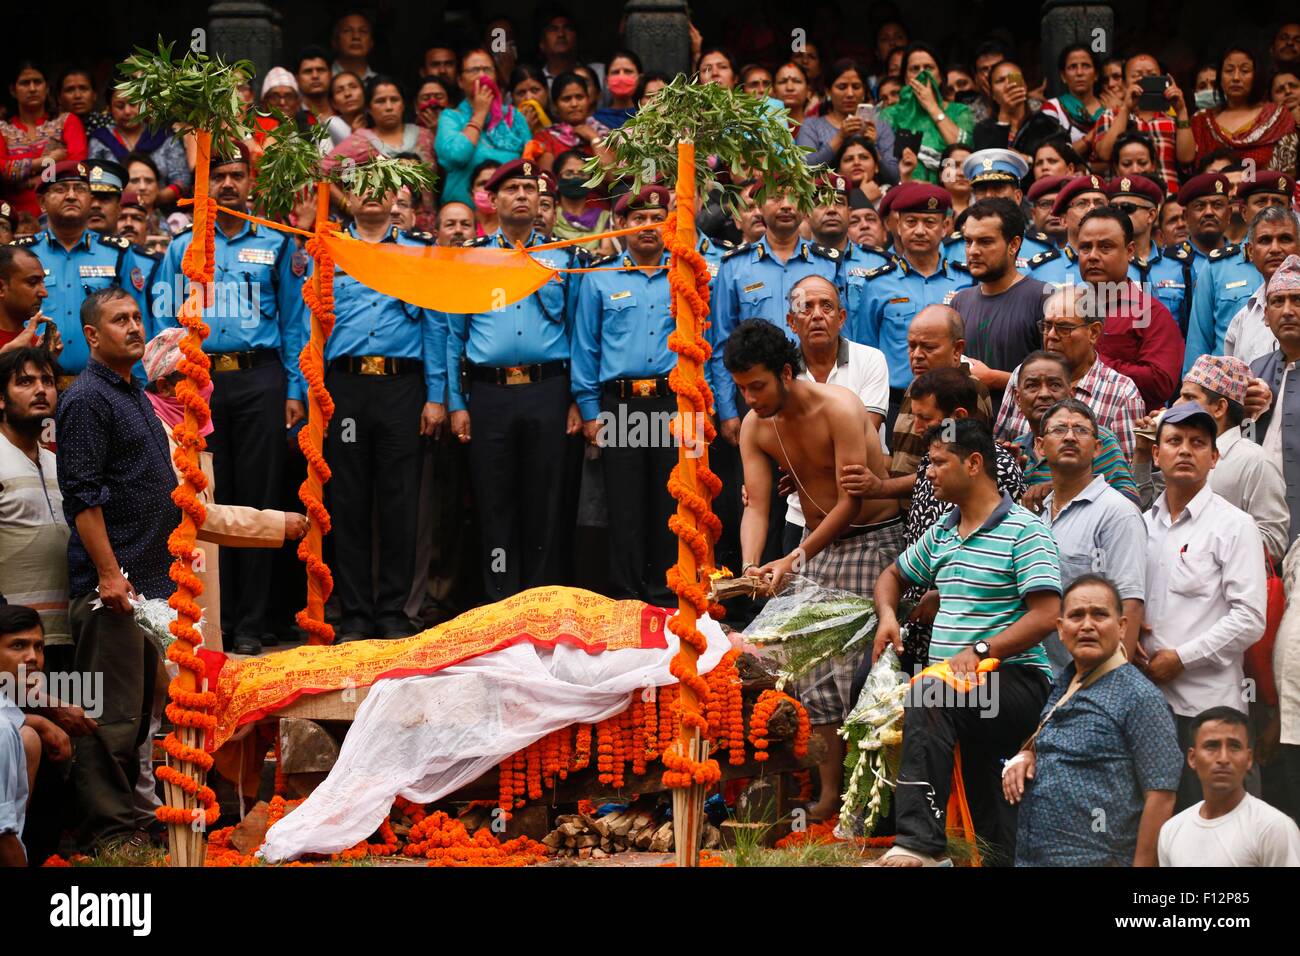 Kathmandu, Nepal. 25th Aug, 2015. Son of the Senior Superintendent of Police (SSP) Laxman Neupane killed at a clash with protesters gives last tribute to his father at Pashupatinath Temple in Kathmandu, Nepal, Aug. 25, 2015. The death toll in the violent clash that erupted over the proposed federalism in the far western Nepal has reached to 20, local media reported. © Pratap Thapa/Xinhua/Alamy Live News Stock Photo